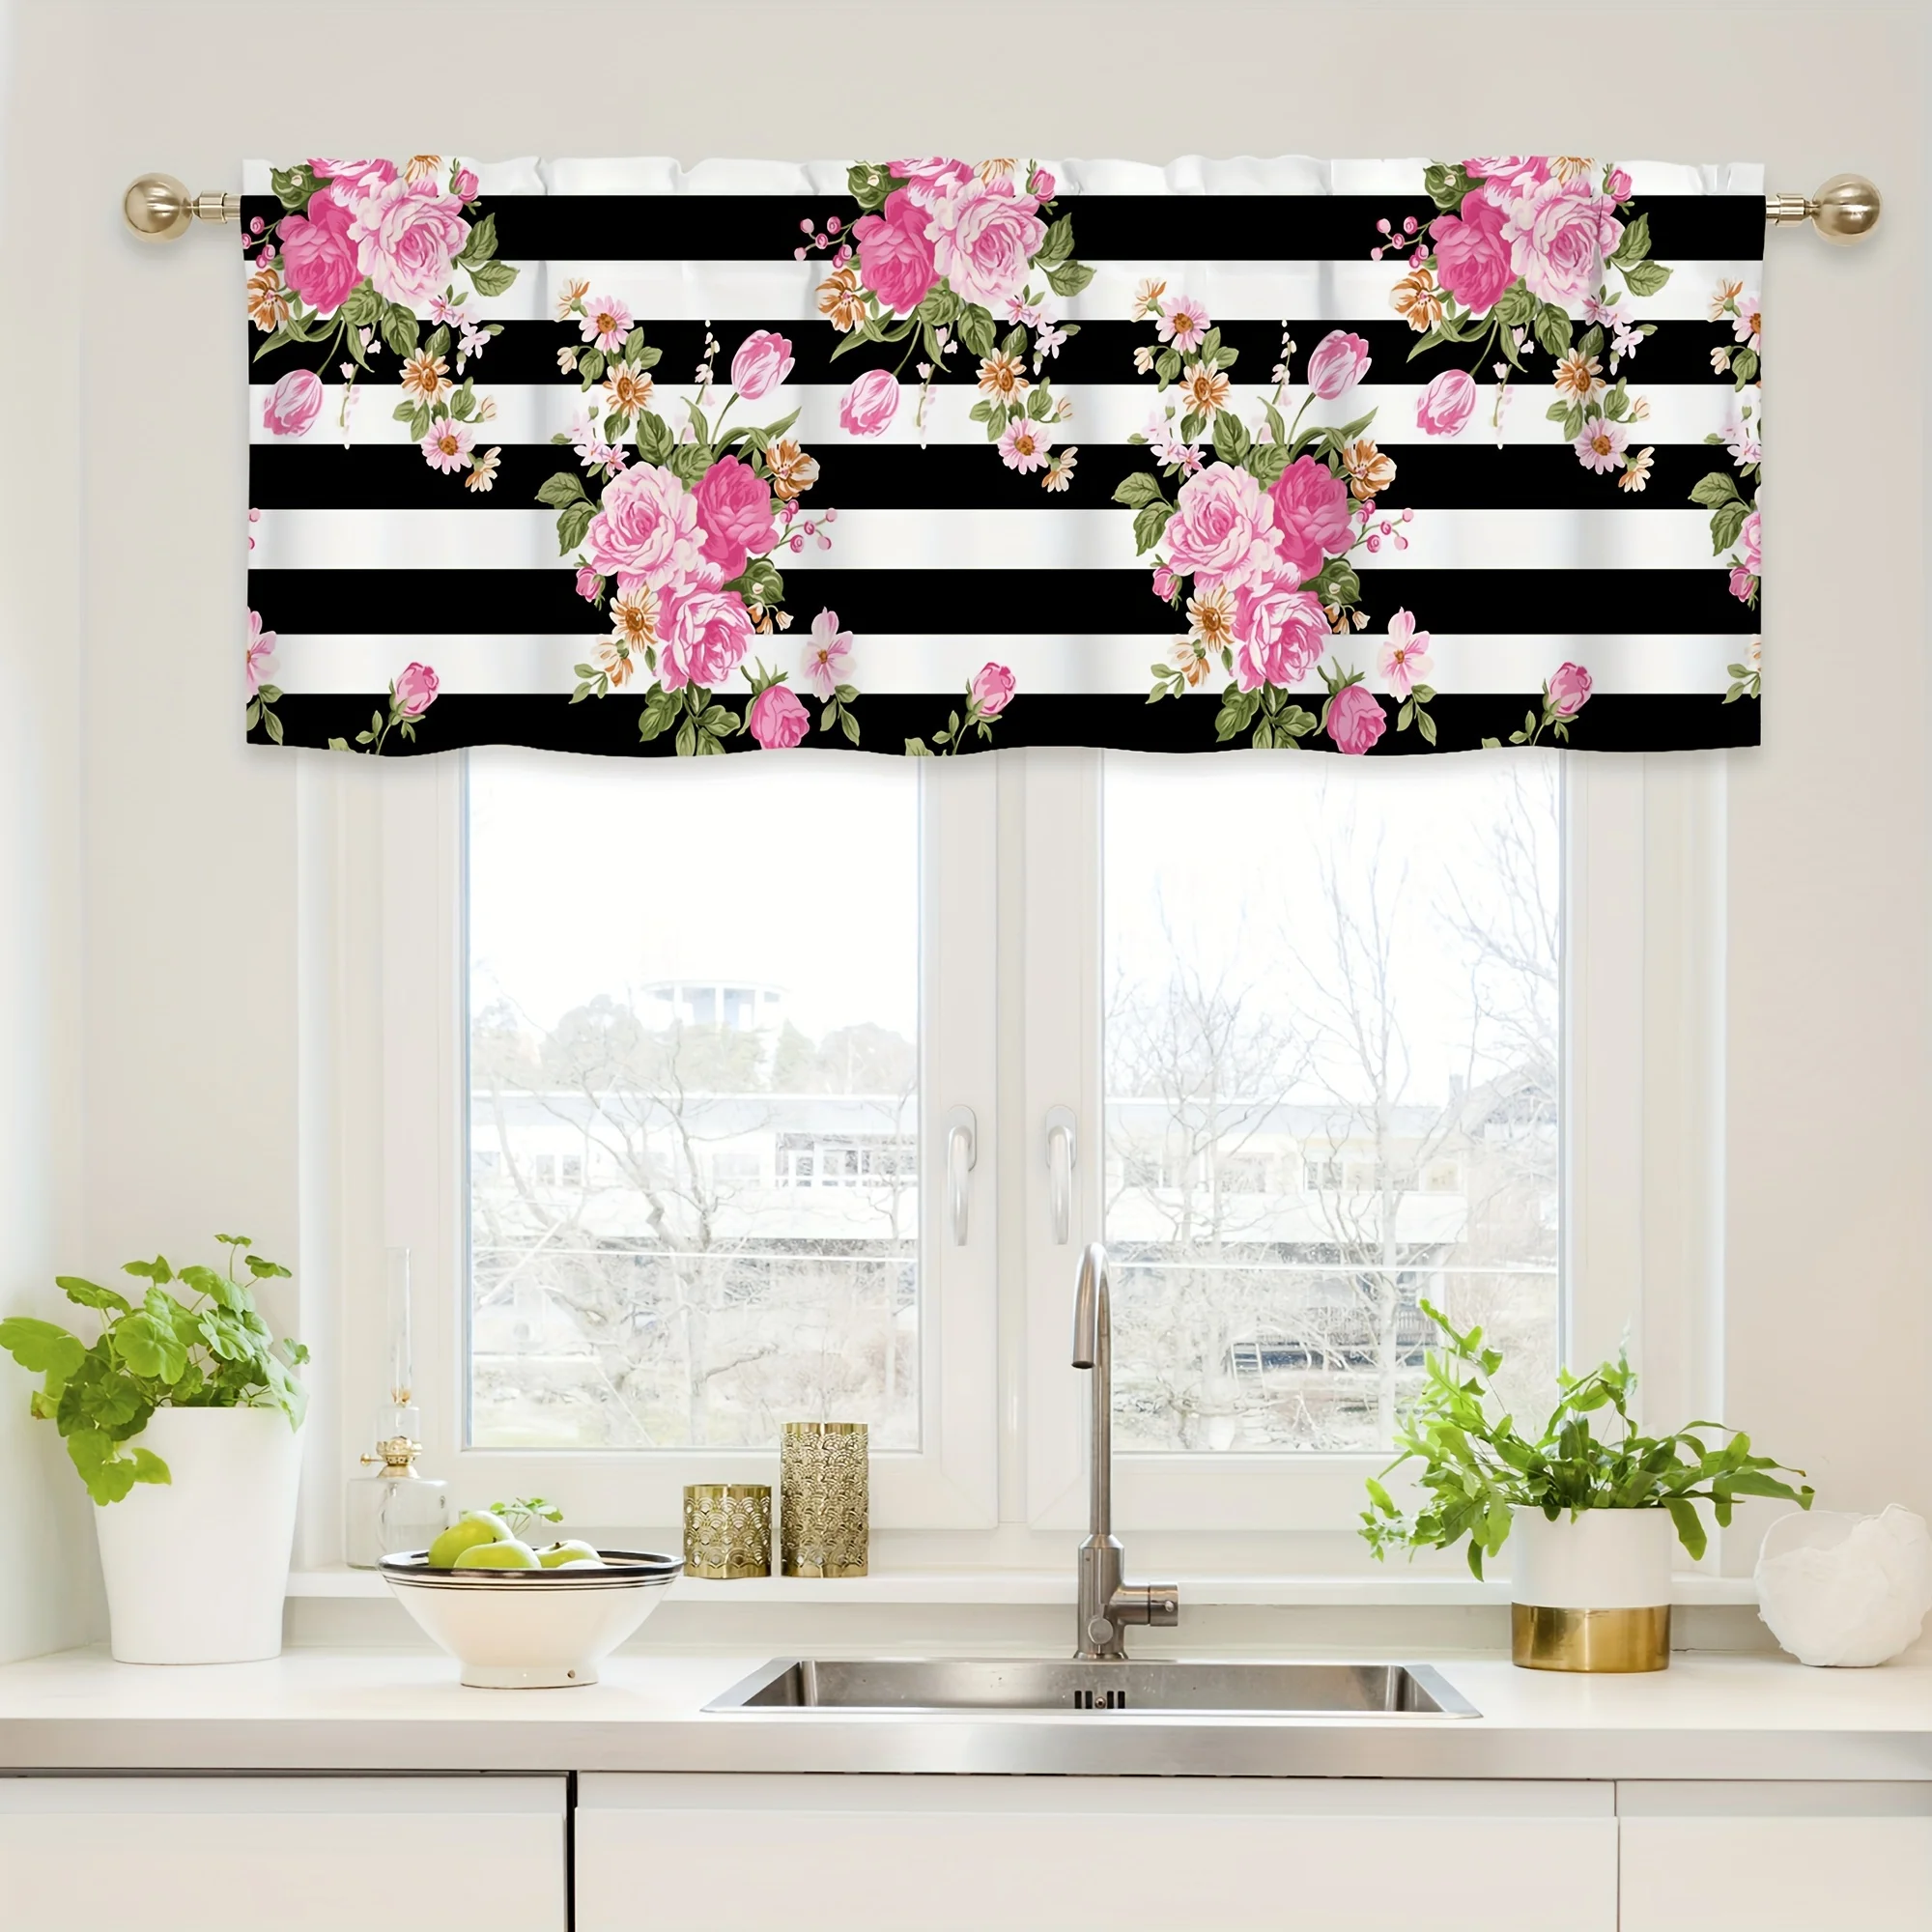 

1pcs Black Striped Colorful Floral Print Home Kitchen Bathroom Sink Sunshade Curtain Suitable for Study Kitchen Sunshade Cloth